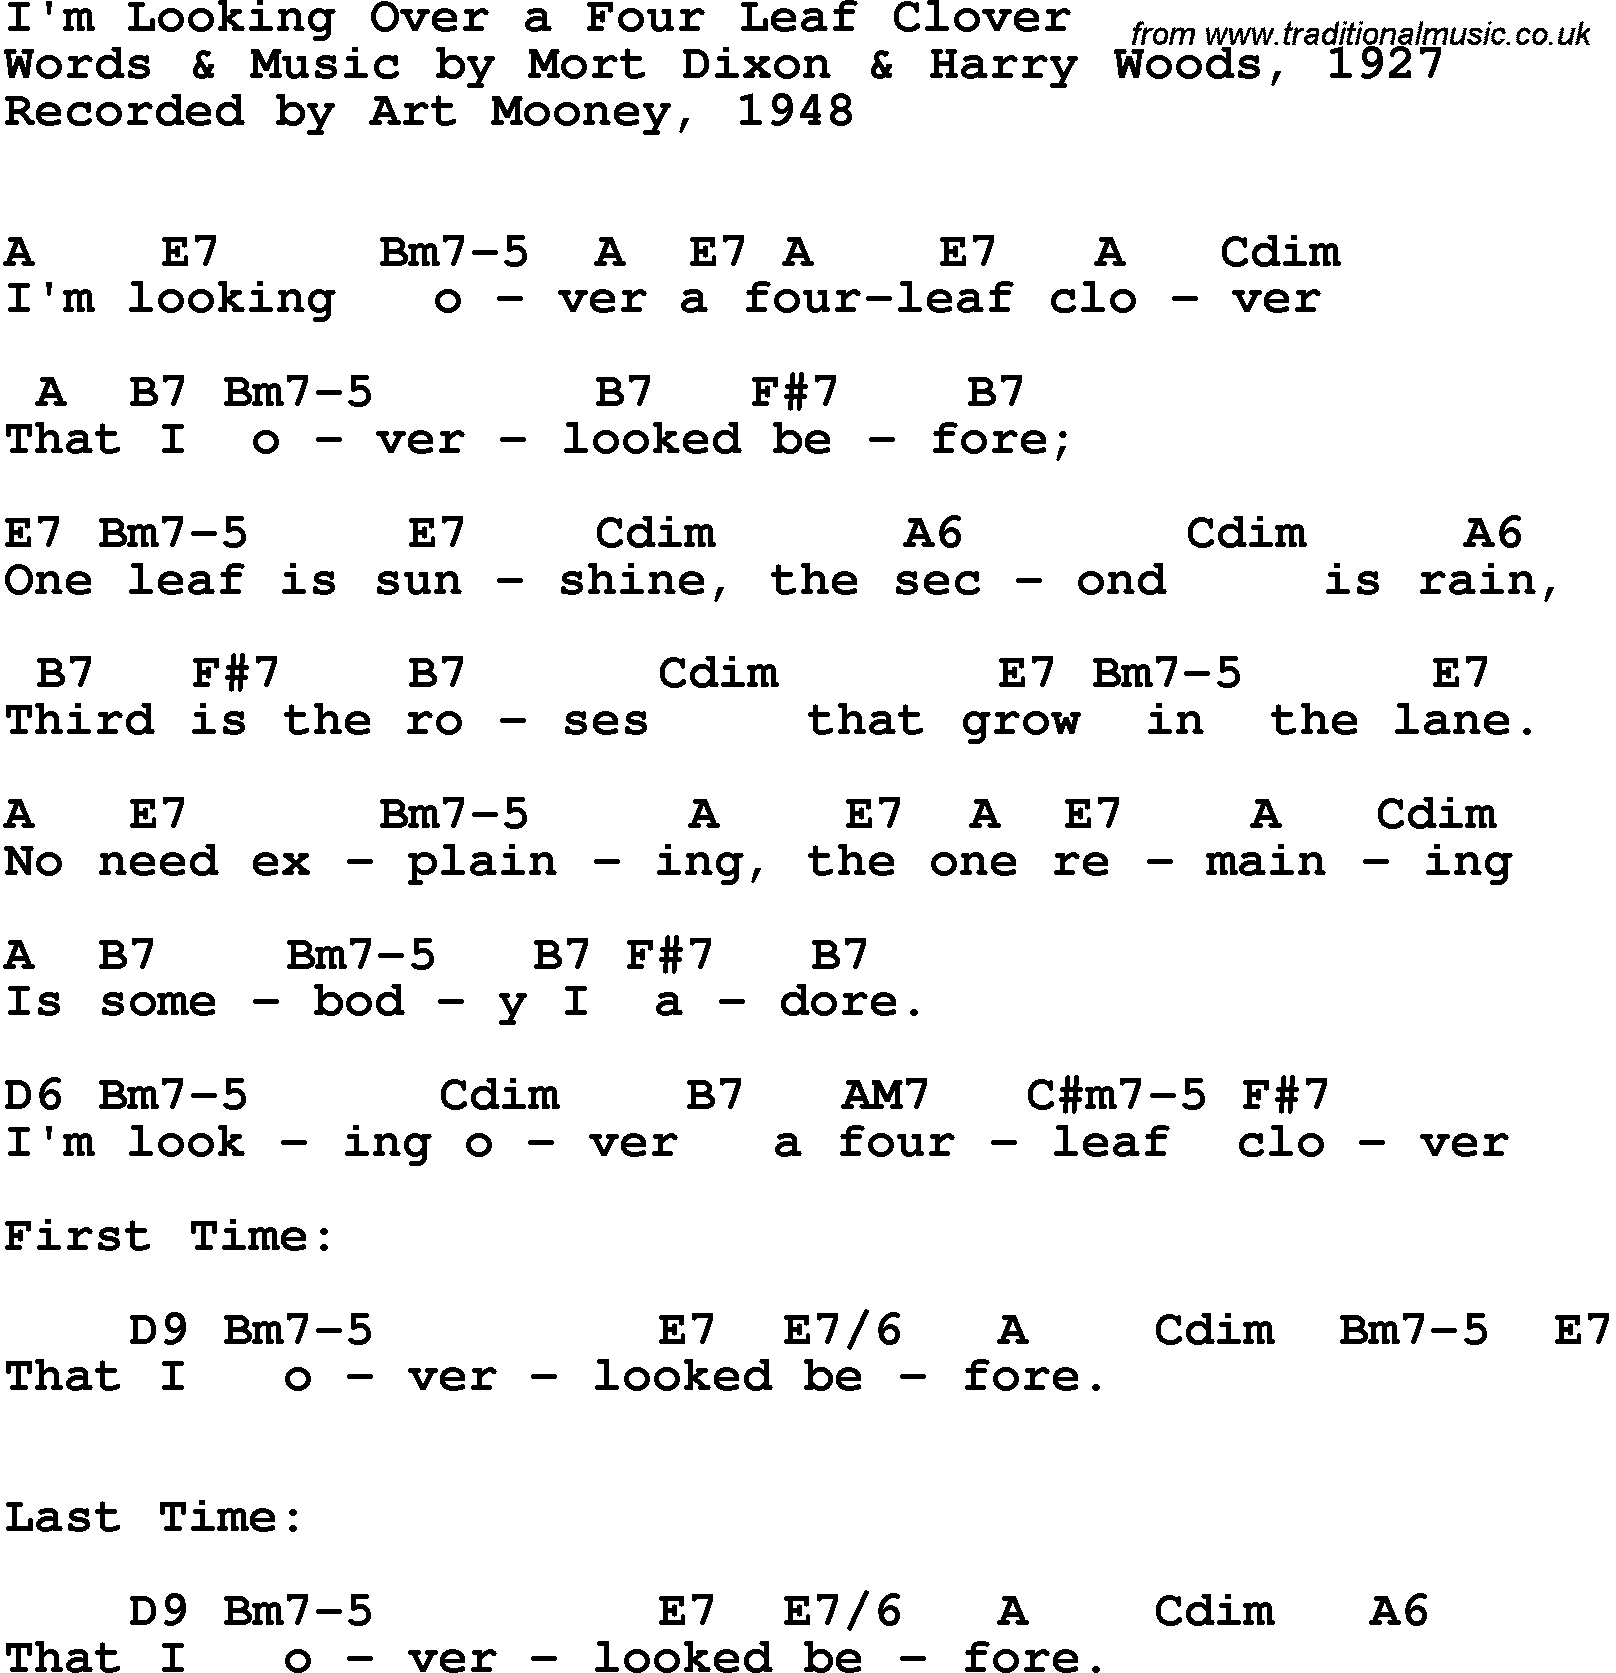 Song Lyrics with guitar chords for I'm Looking Over A Four Leaf Clover - Art Mooney, 1948